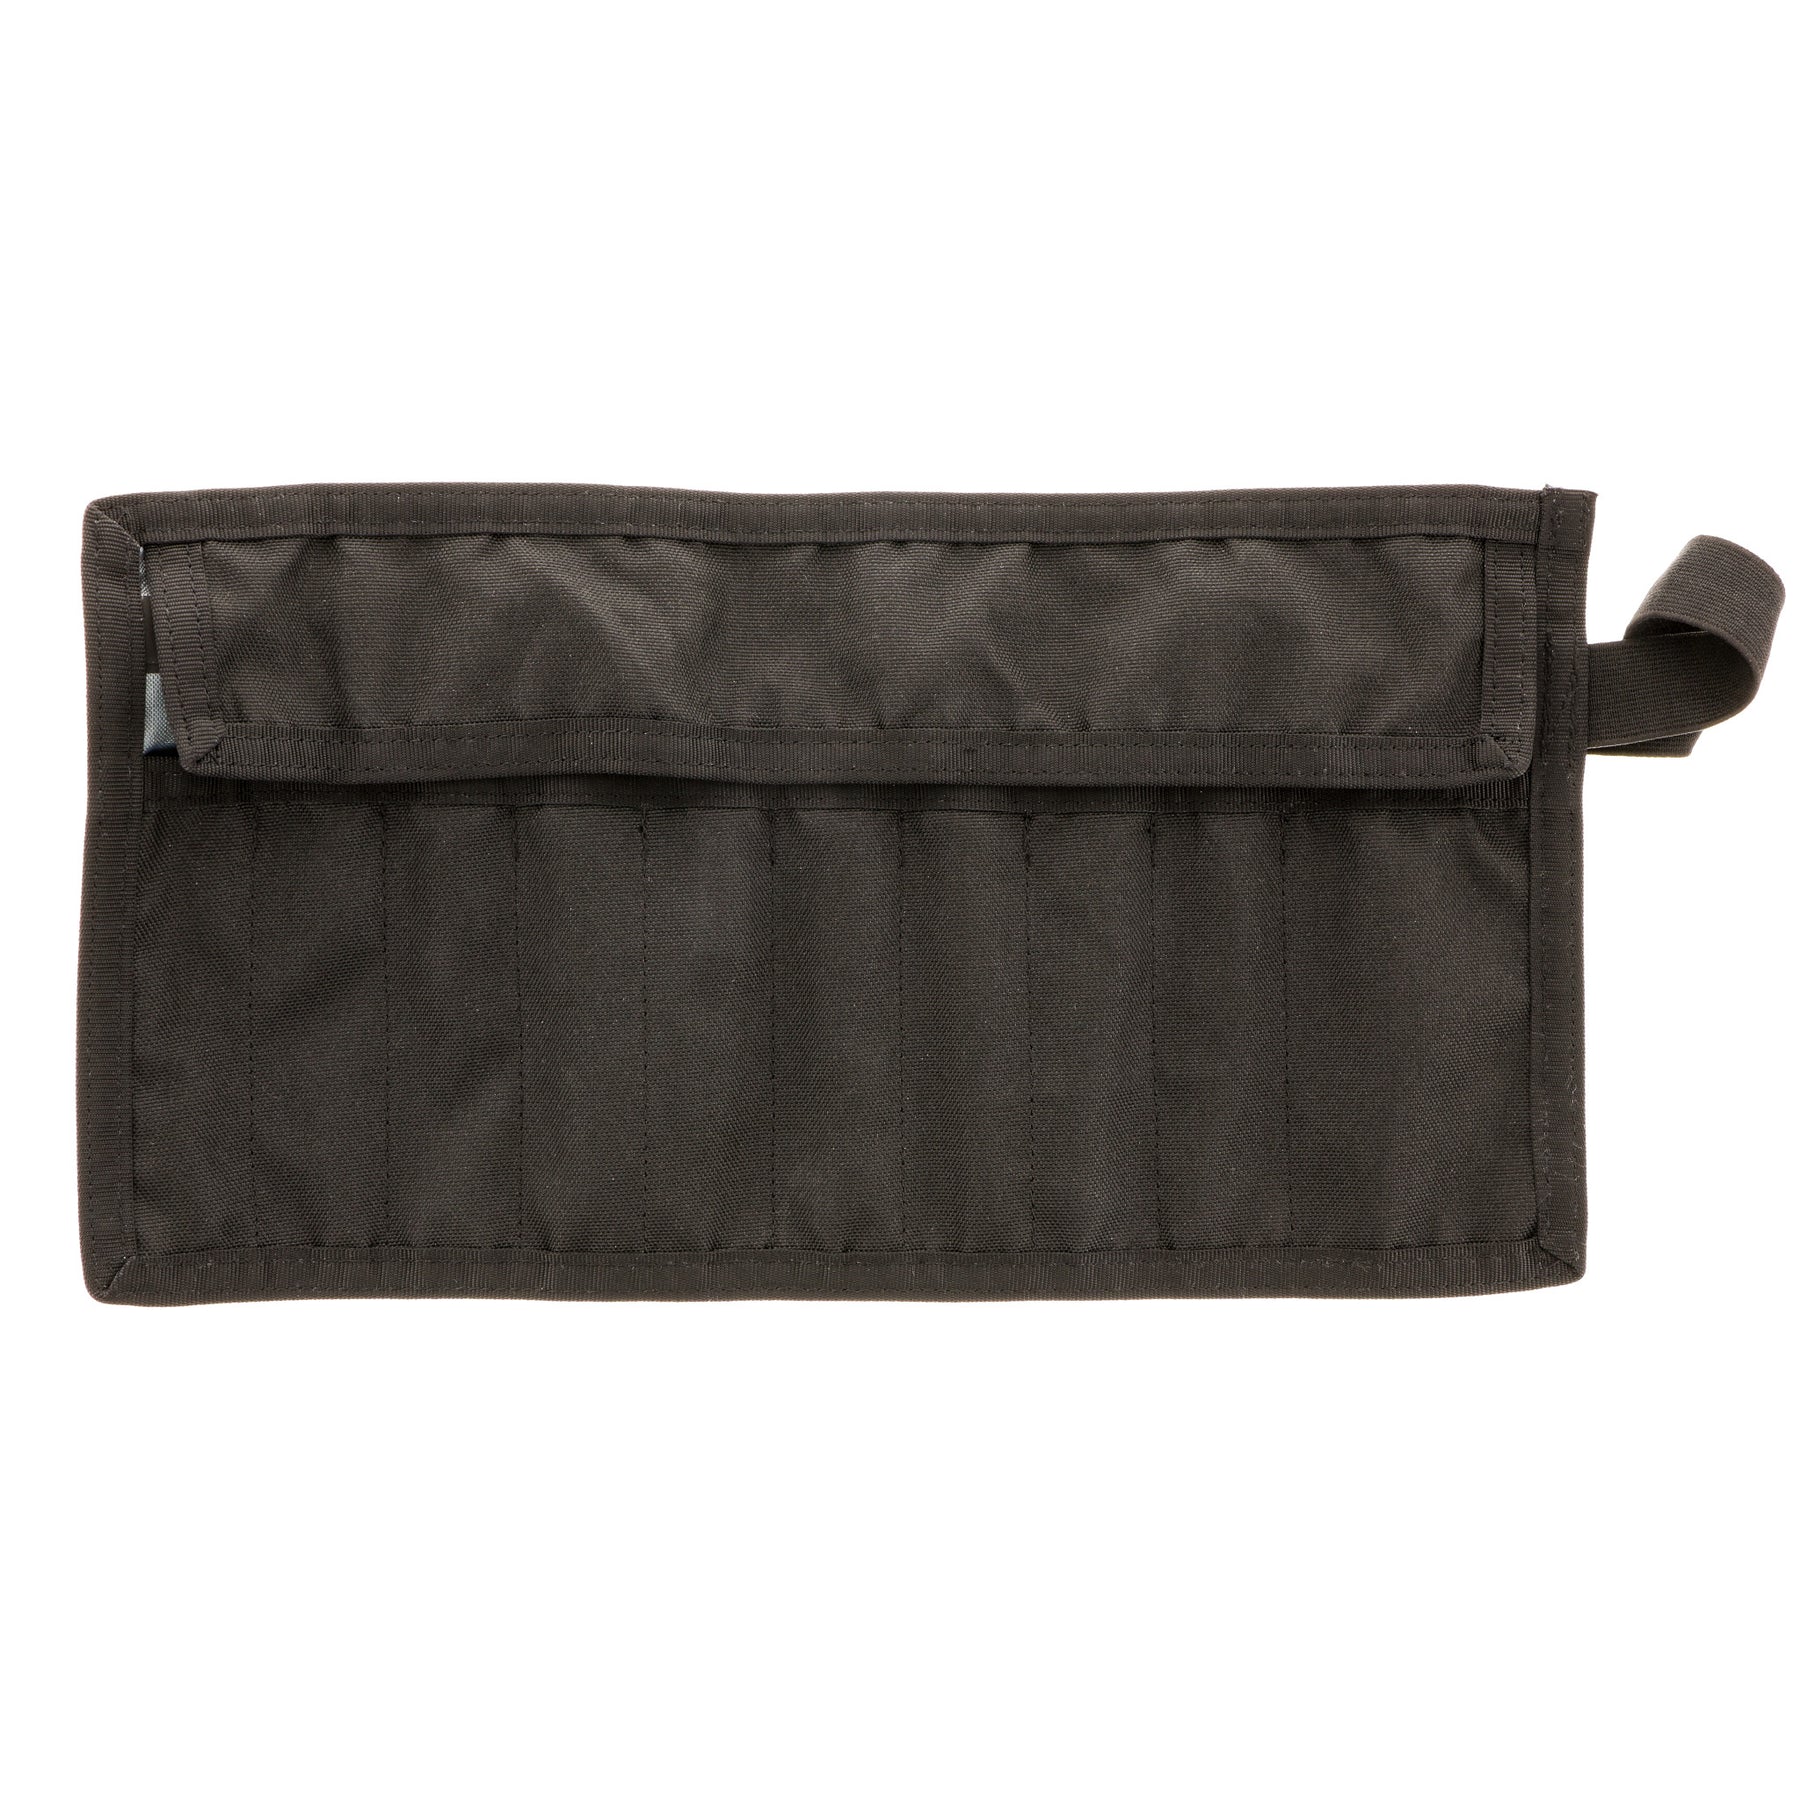 Roll-up Tool Pouch